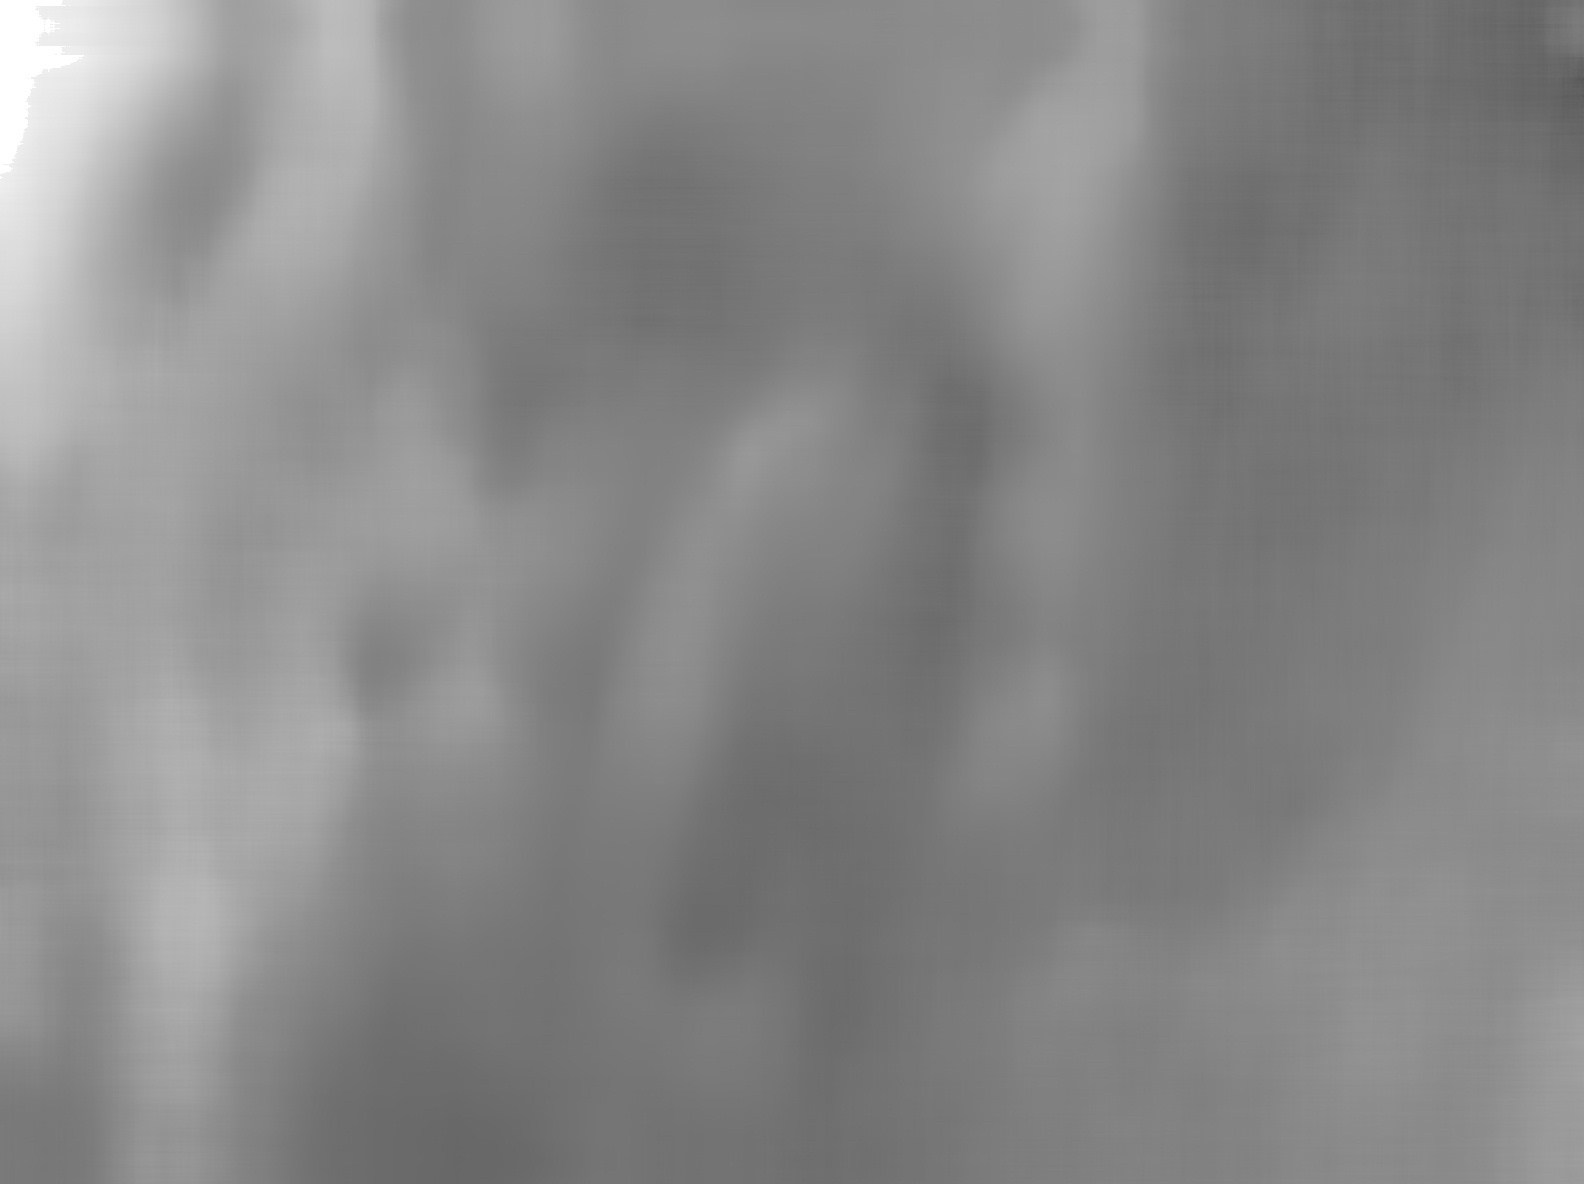 Nasa's Mars rover Curiosity acquired this image using its Mars Hand Lens Imager (MAHLI) on Sol 3375